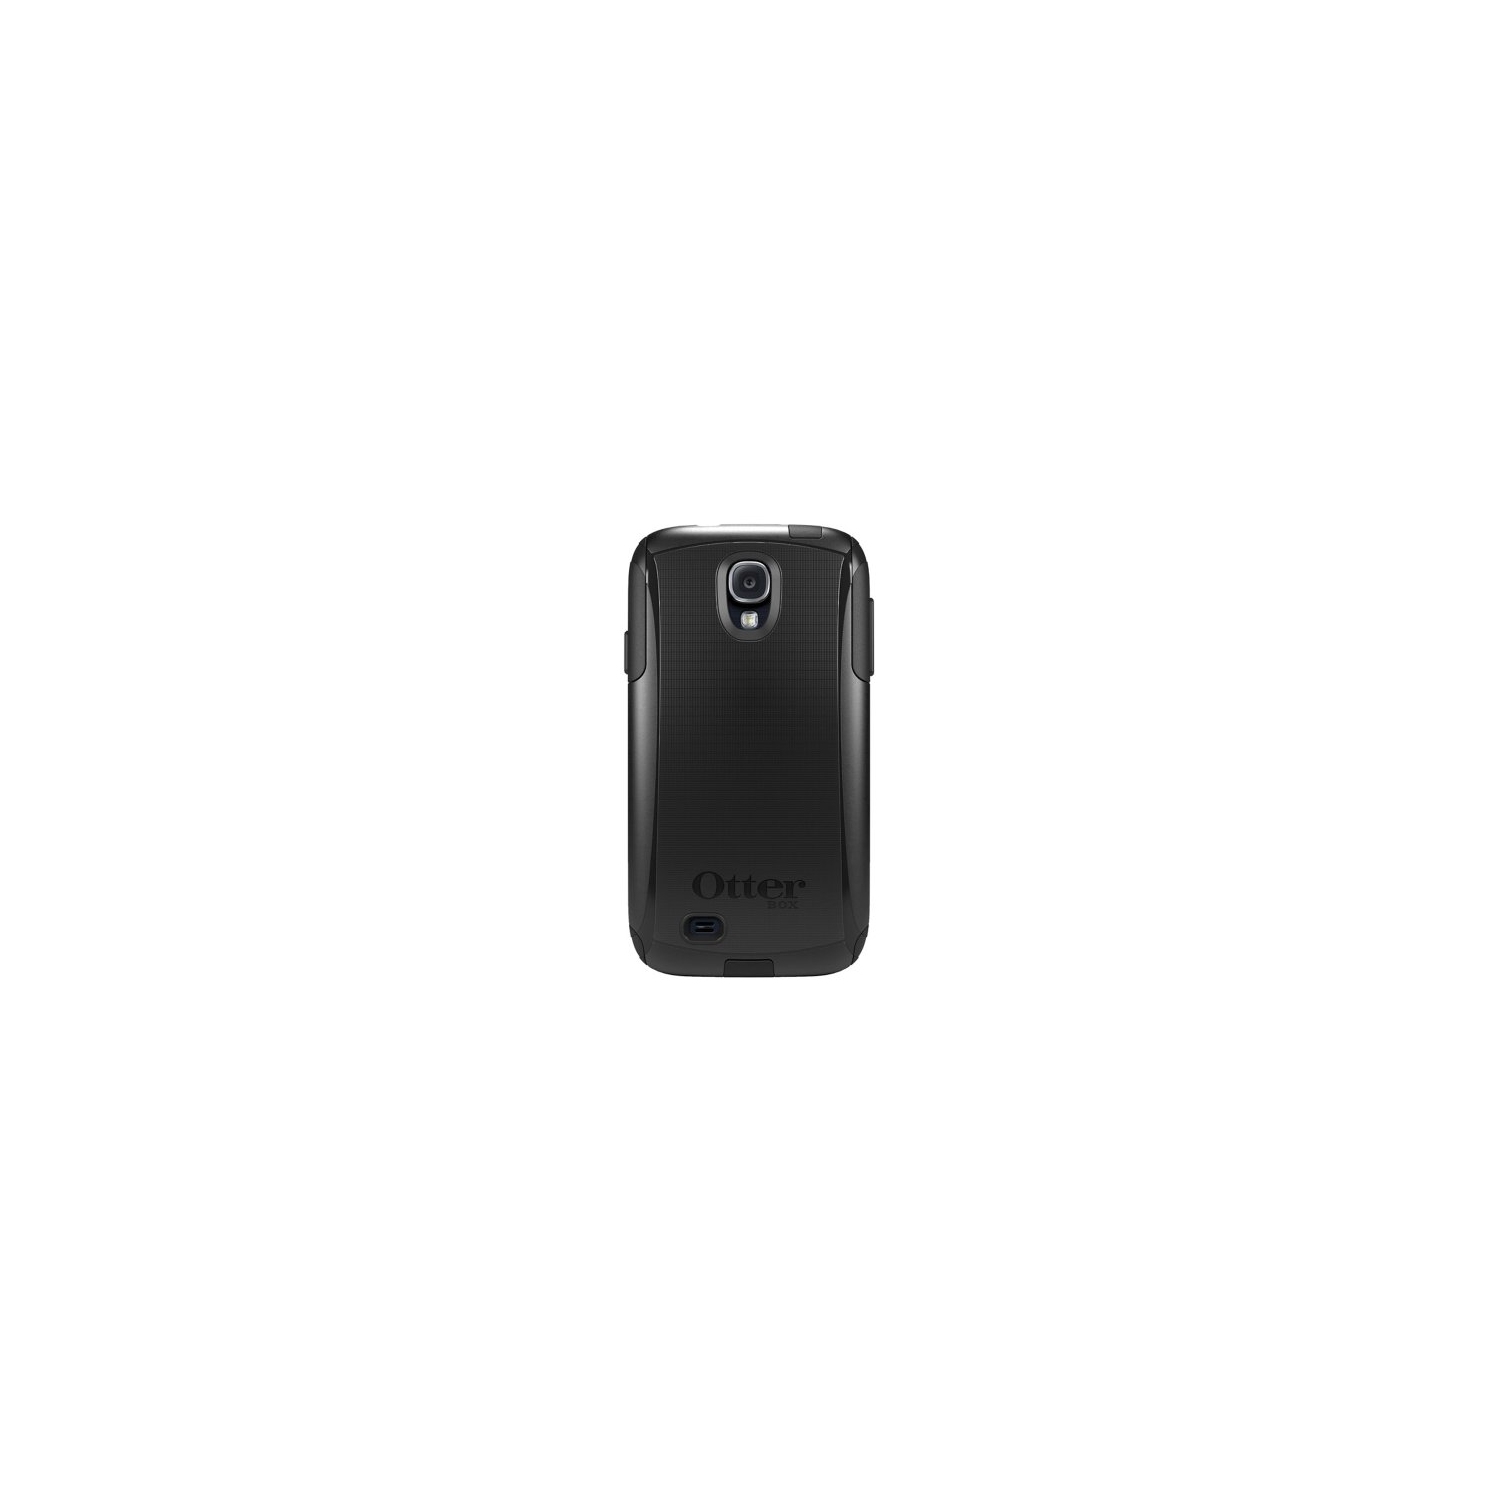 OtterBox Commuter Series Case for Samsung Galaxy S4 - Carrier Packaging - Black